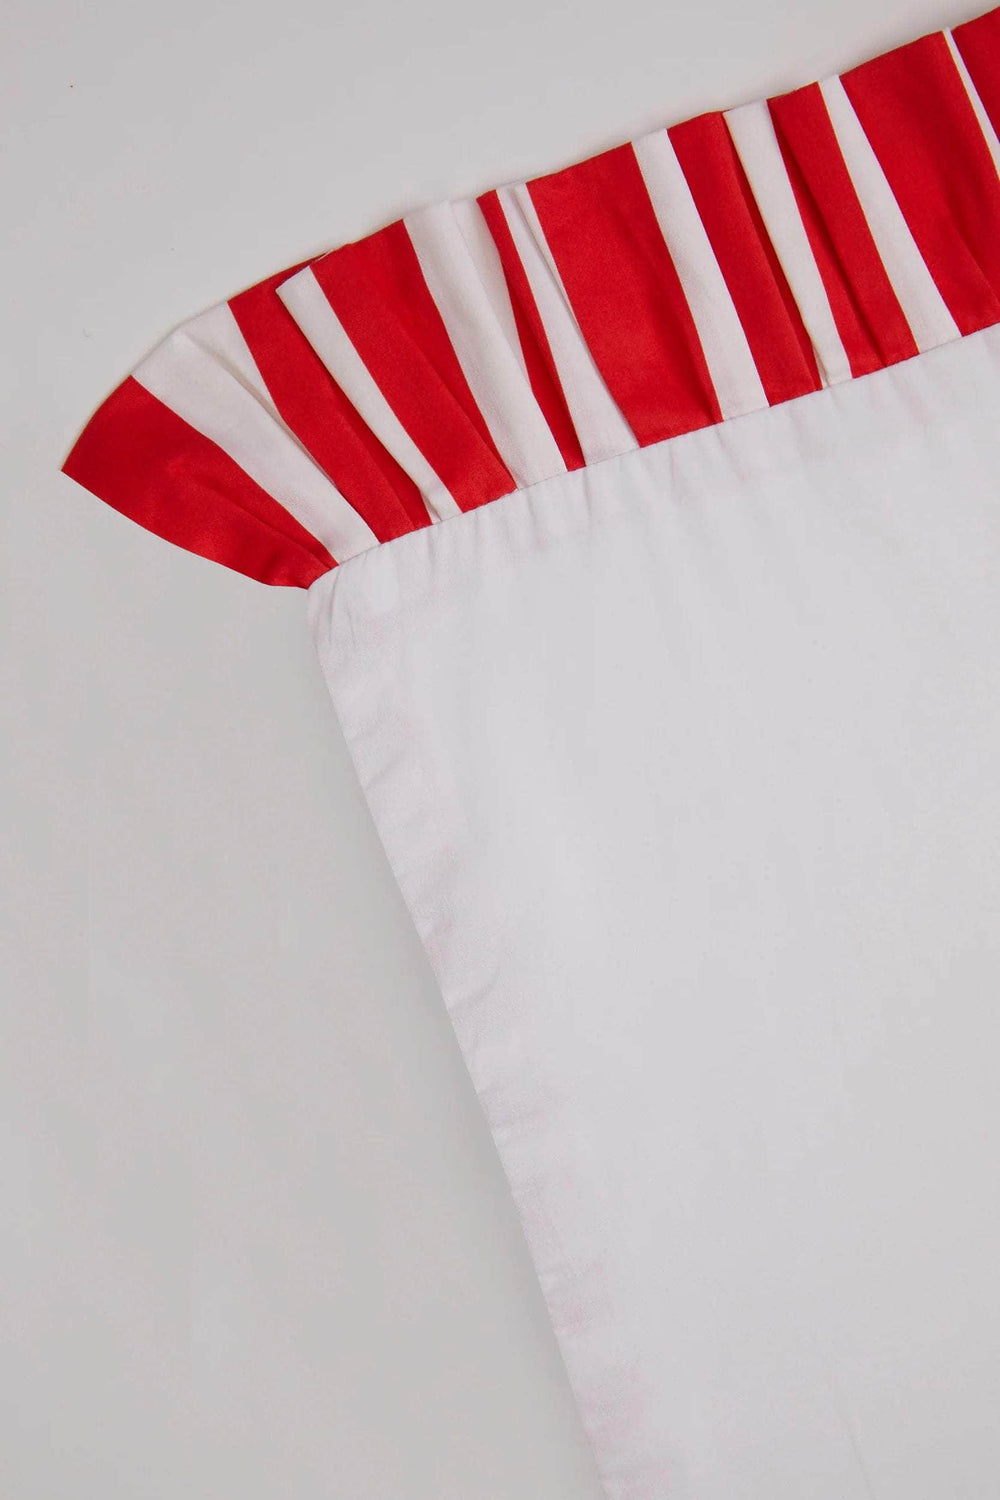 Red and White King Size Flat Sheet